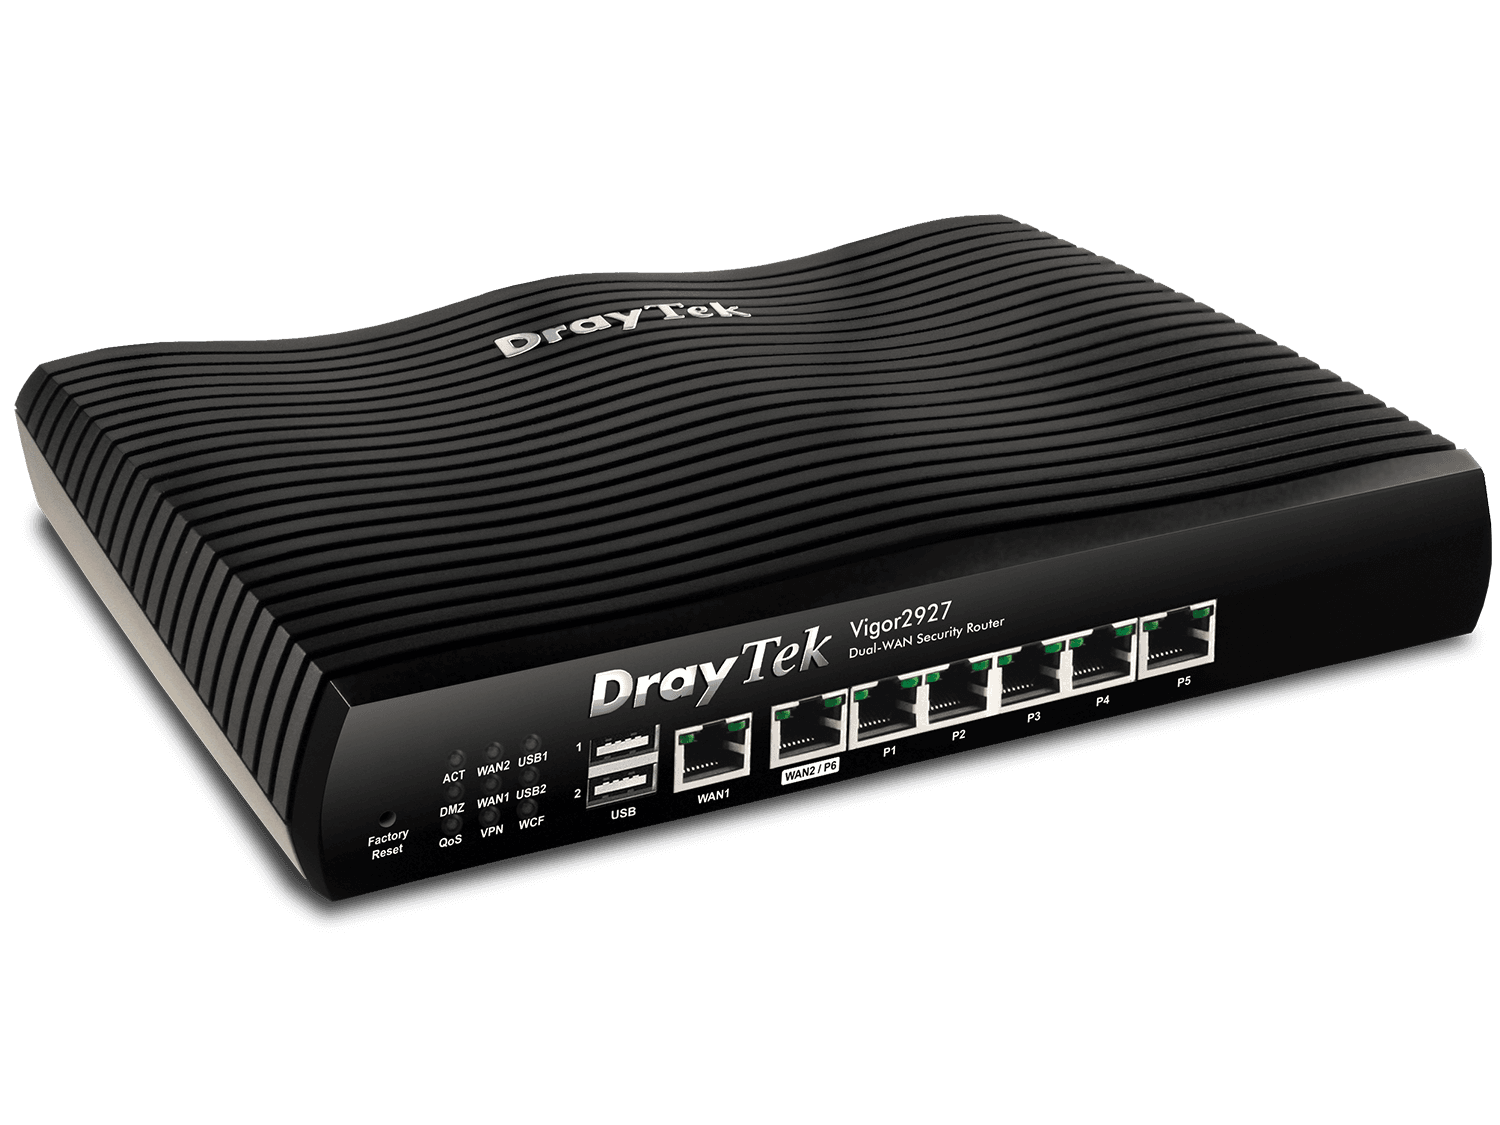 DUAL-WAN SECURITY ROUTER